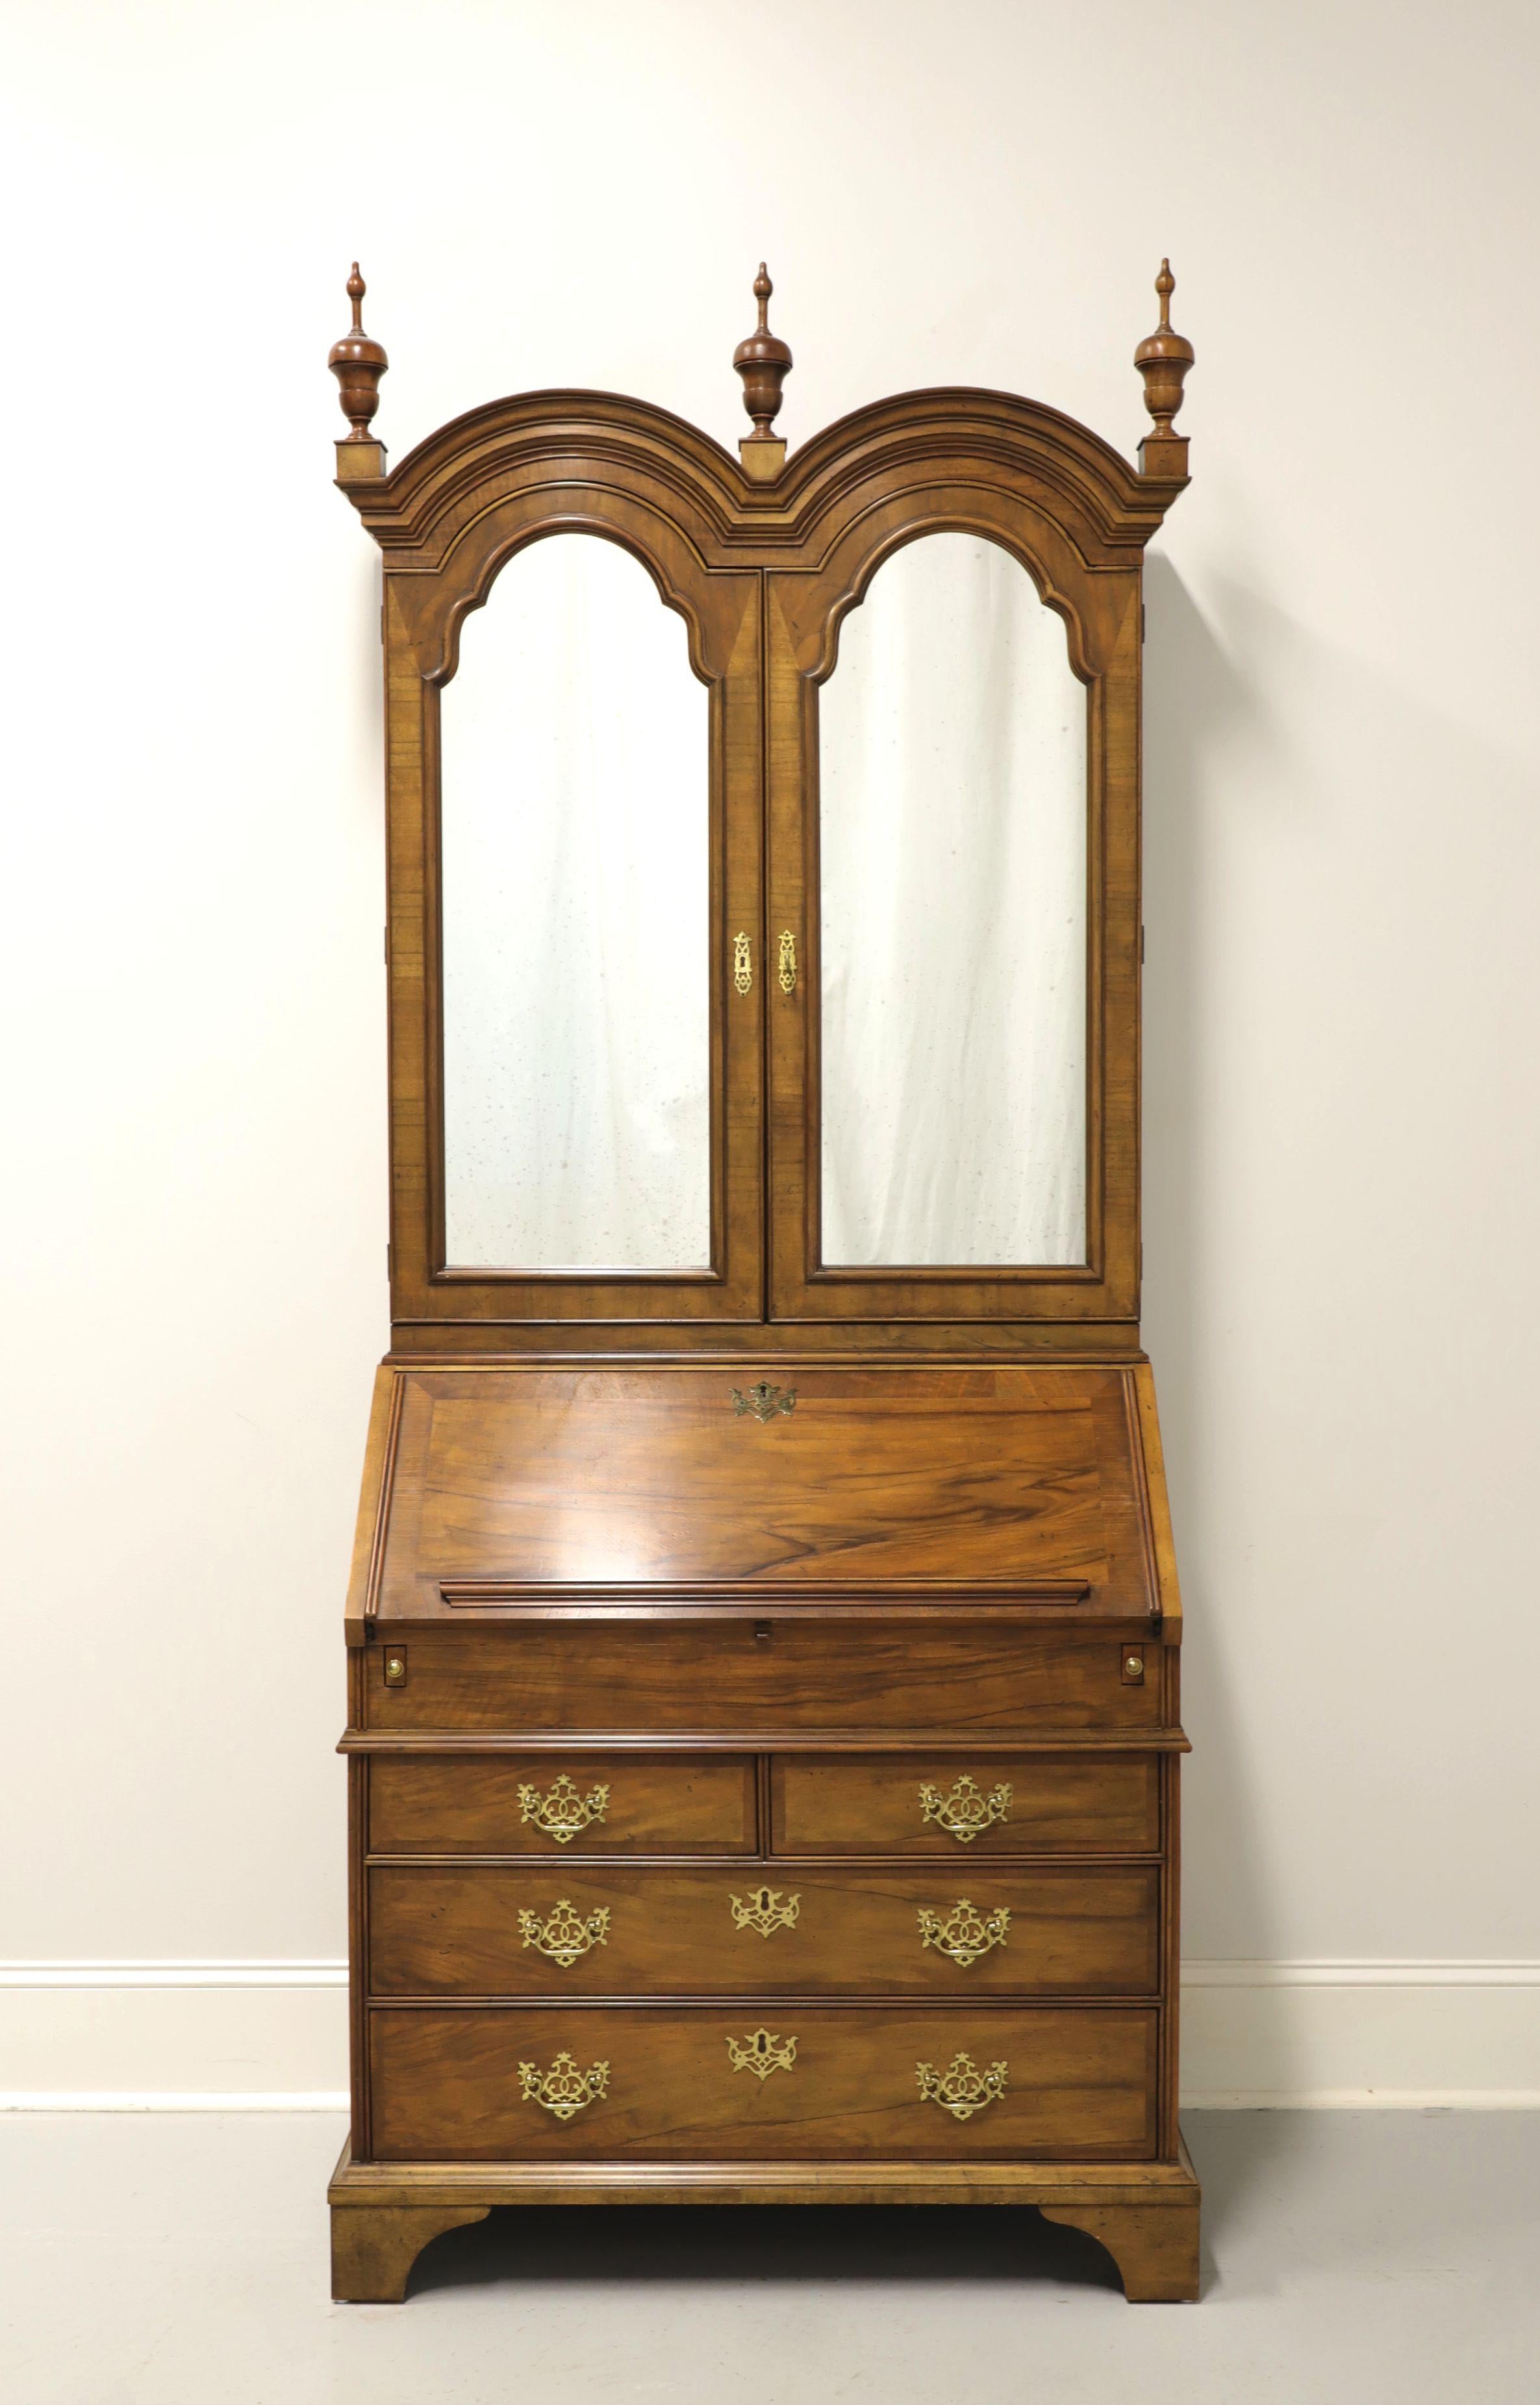 A Georgian style secretary desk by Baker Furniture. Walnut with brass hardware, double bonnet arched top with three finials, crown molding and bracket feet. Upper blind bookcase has 